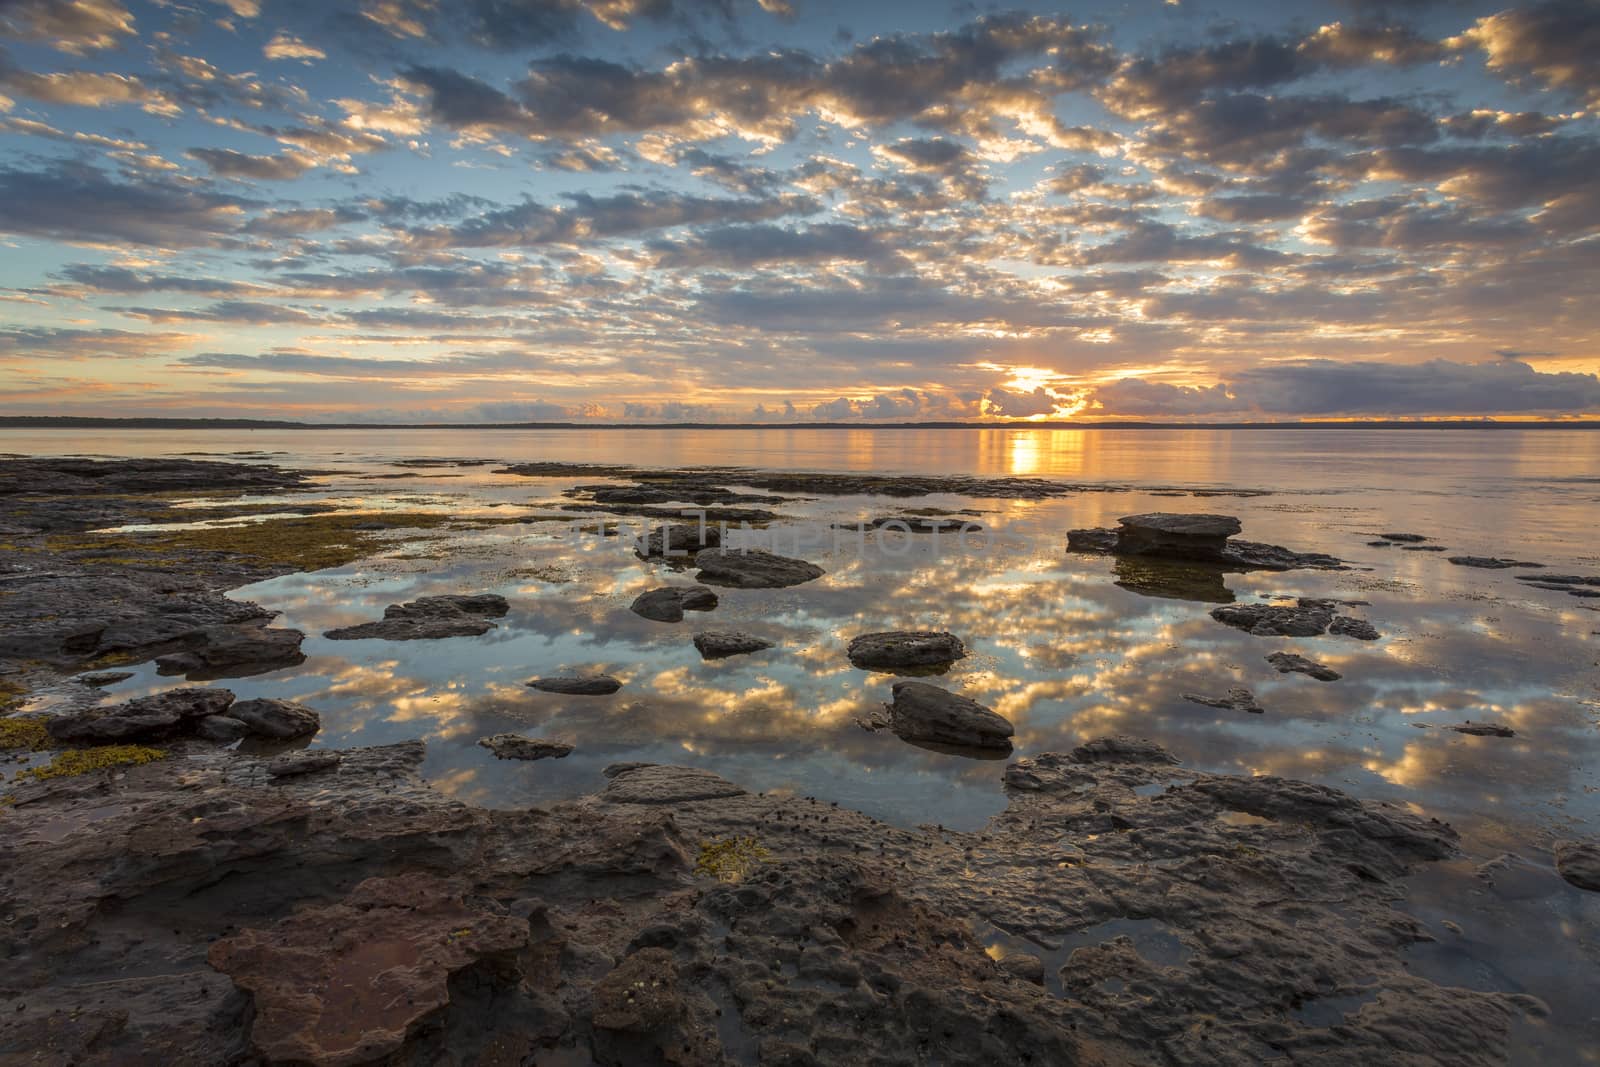 Beautiful sunrise reflecting across the bay at low tide.  Location  Callala Bay, part of Jervis Bay, Australia